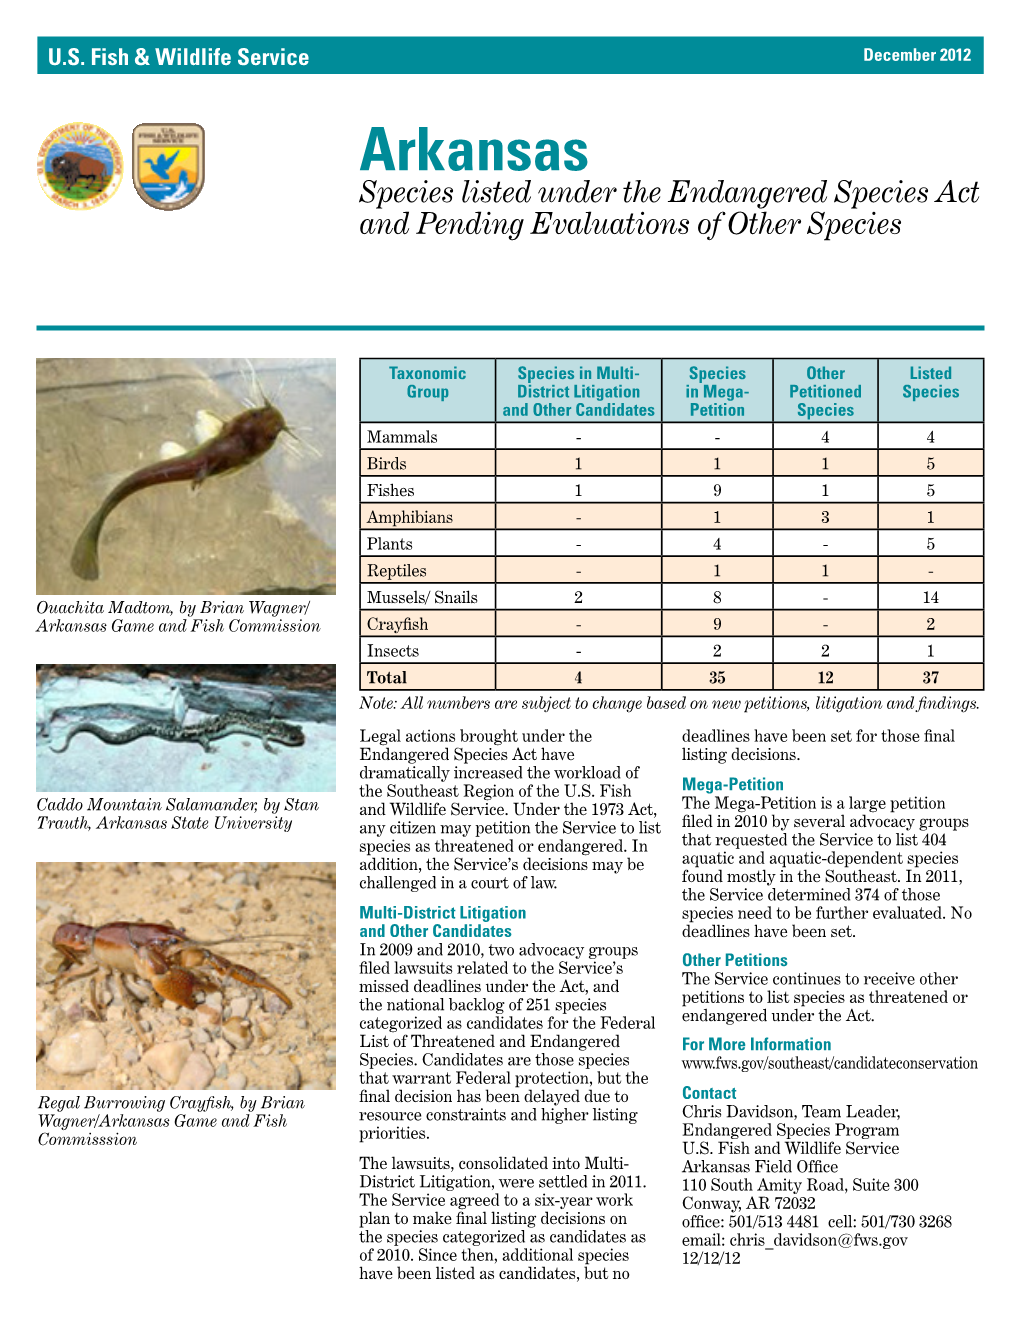 Arkansas Species Listed Under the Endangered Species Act and Pending Evaluations of Other Species